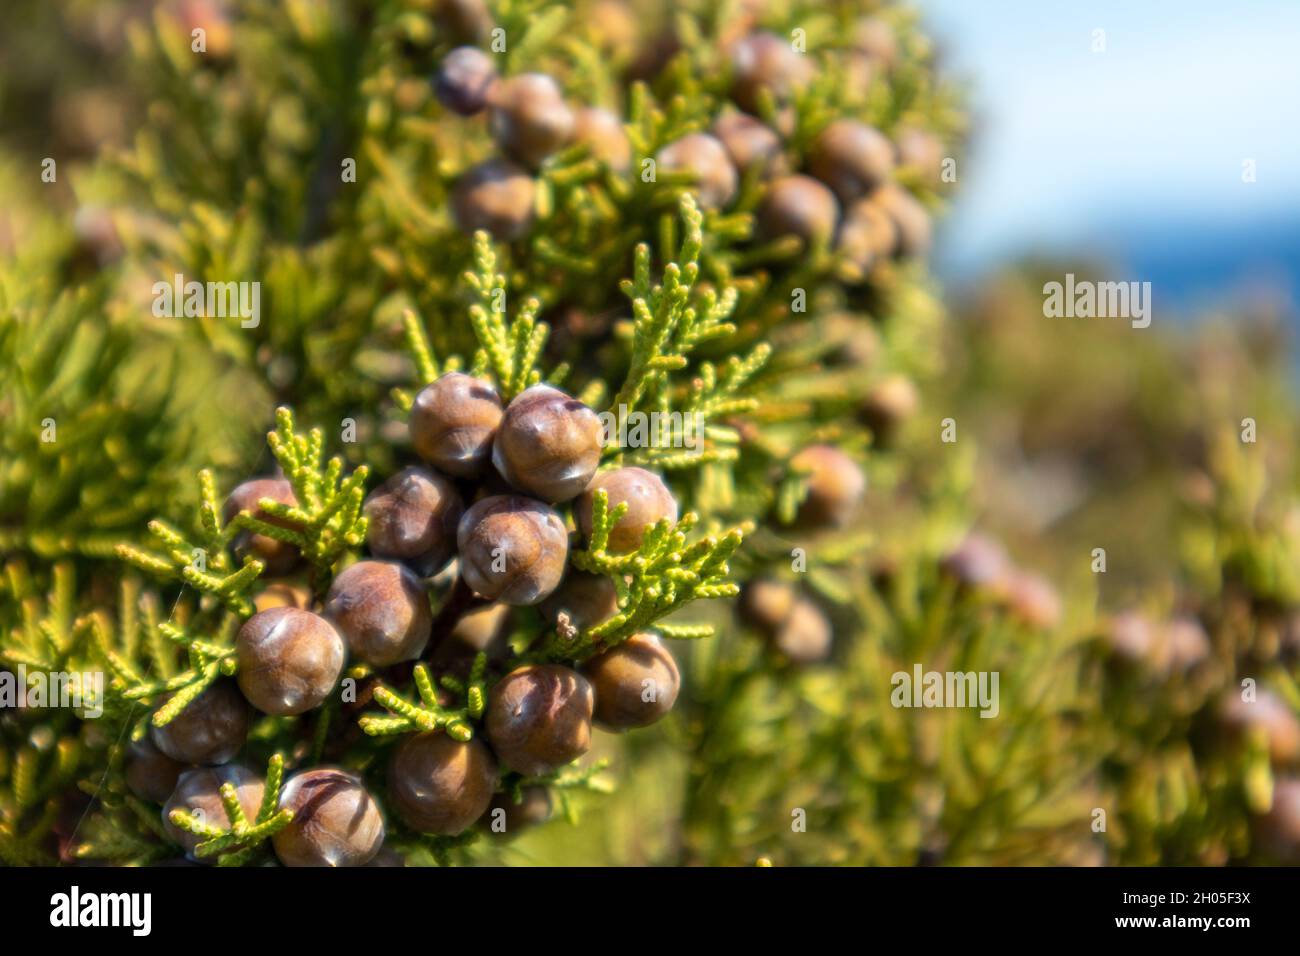 Green Juniperus excelsa with berries, the Greek juniper evergreen tree vibrant close-up with blurred seascape background. Mediterranean sea, Greece Stock Photo